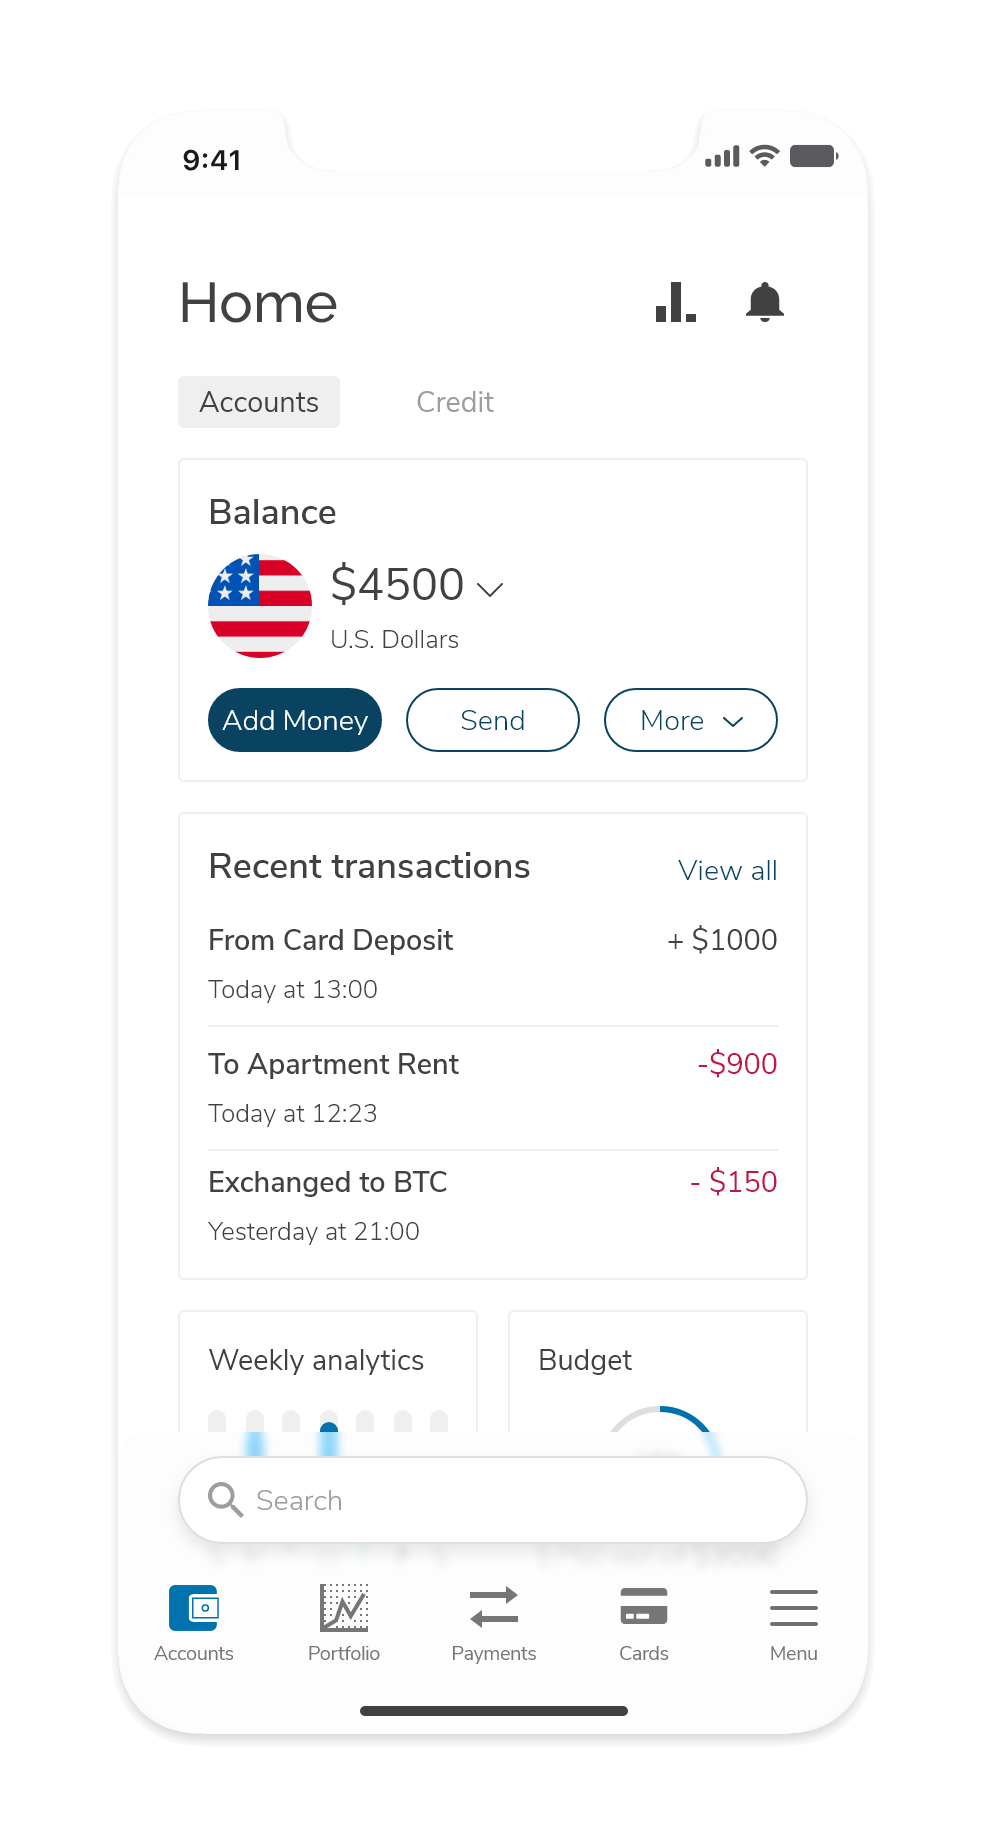 Home page account overview showing an account balance